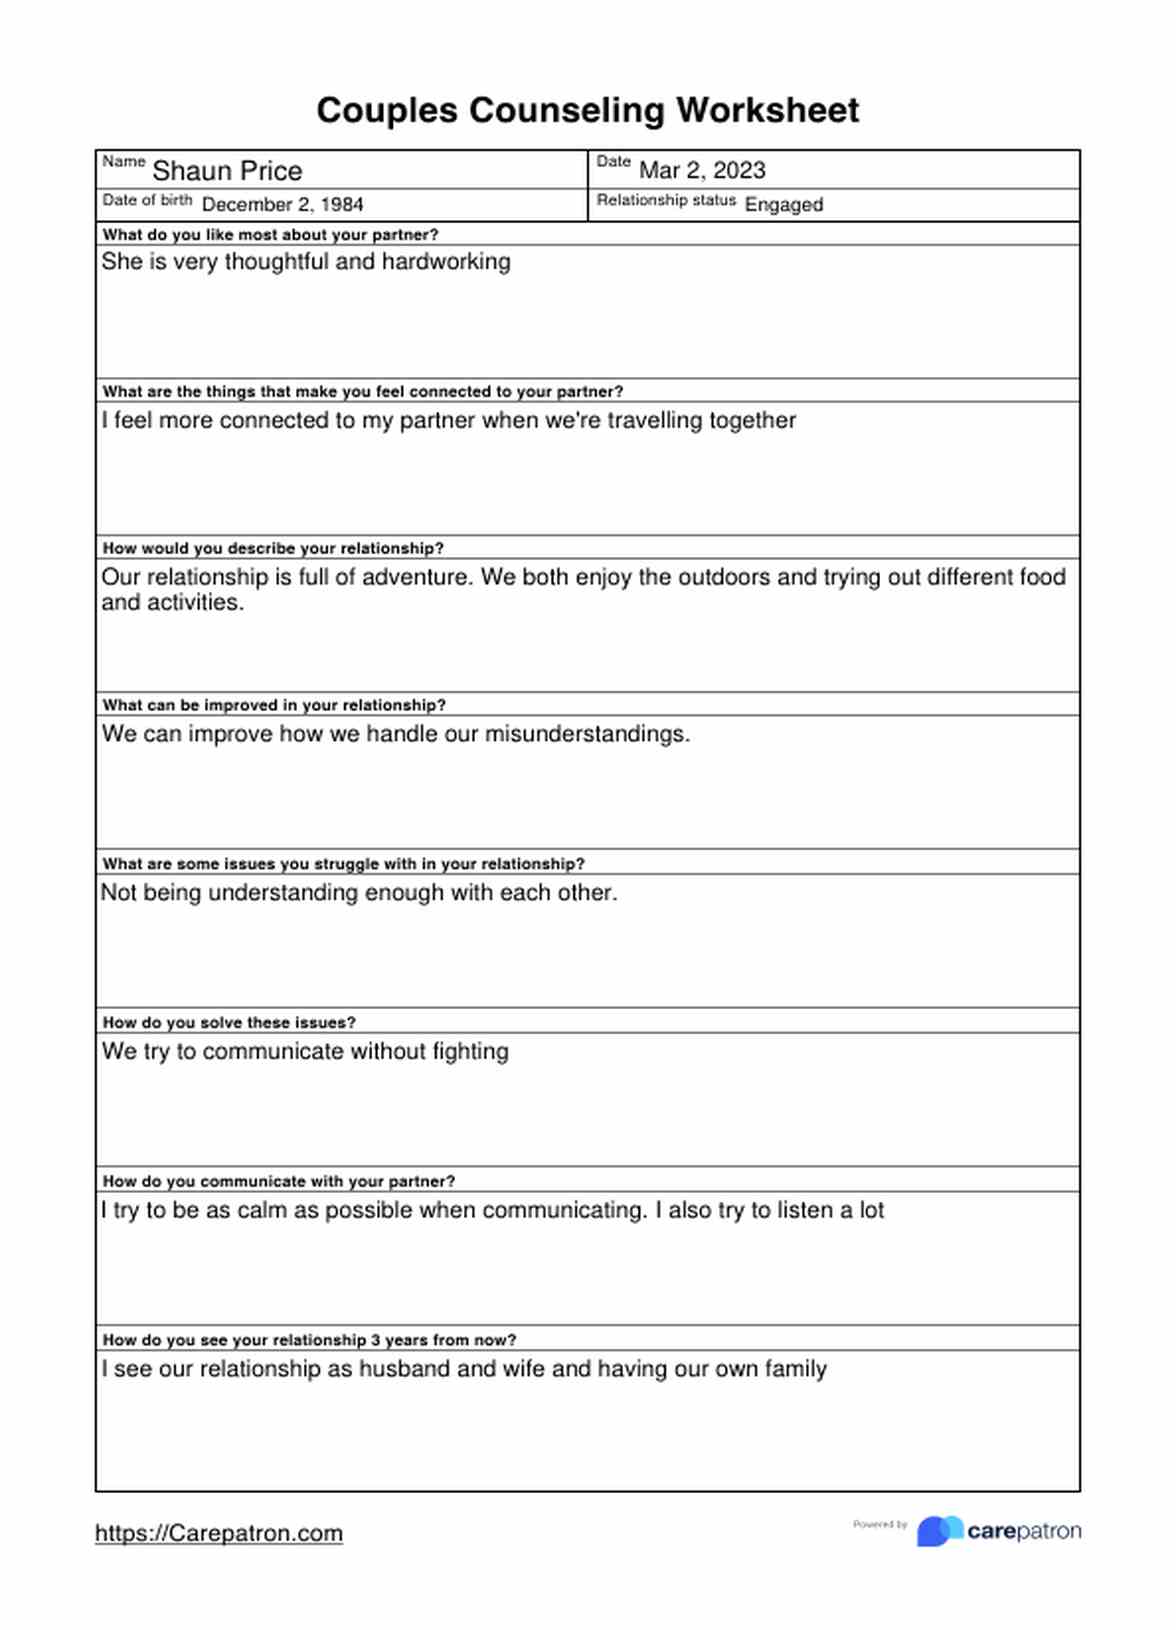 Couples Counseling Worksheets PDF Example